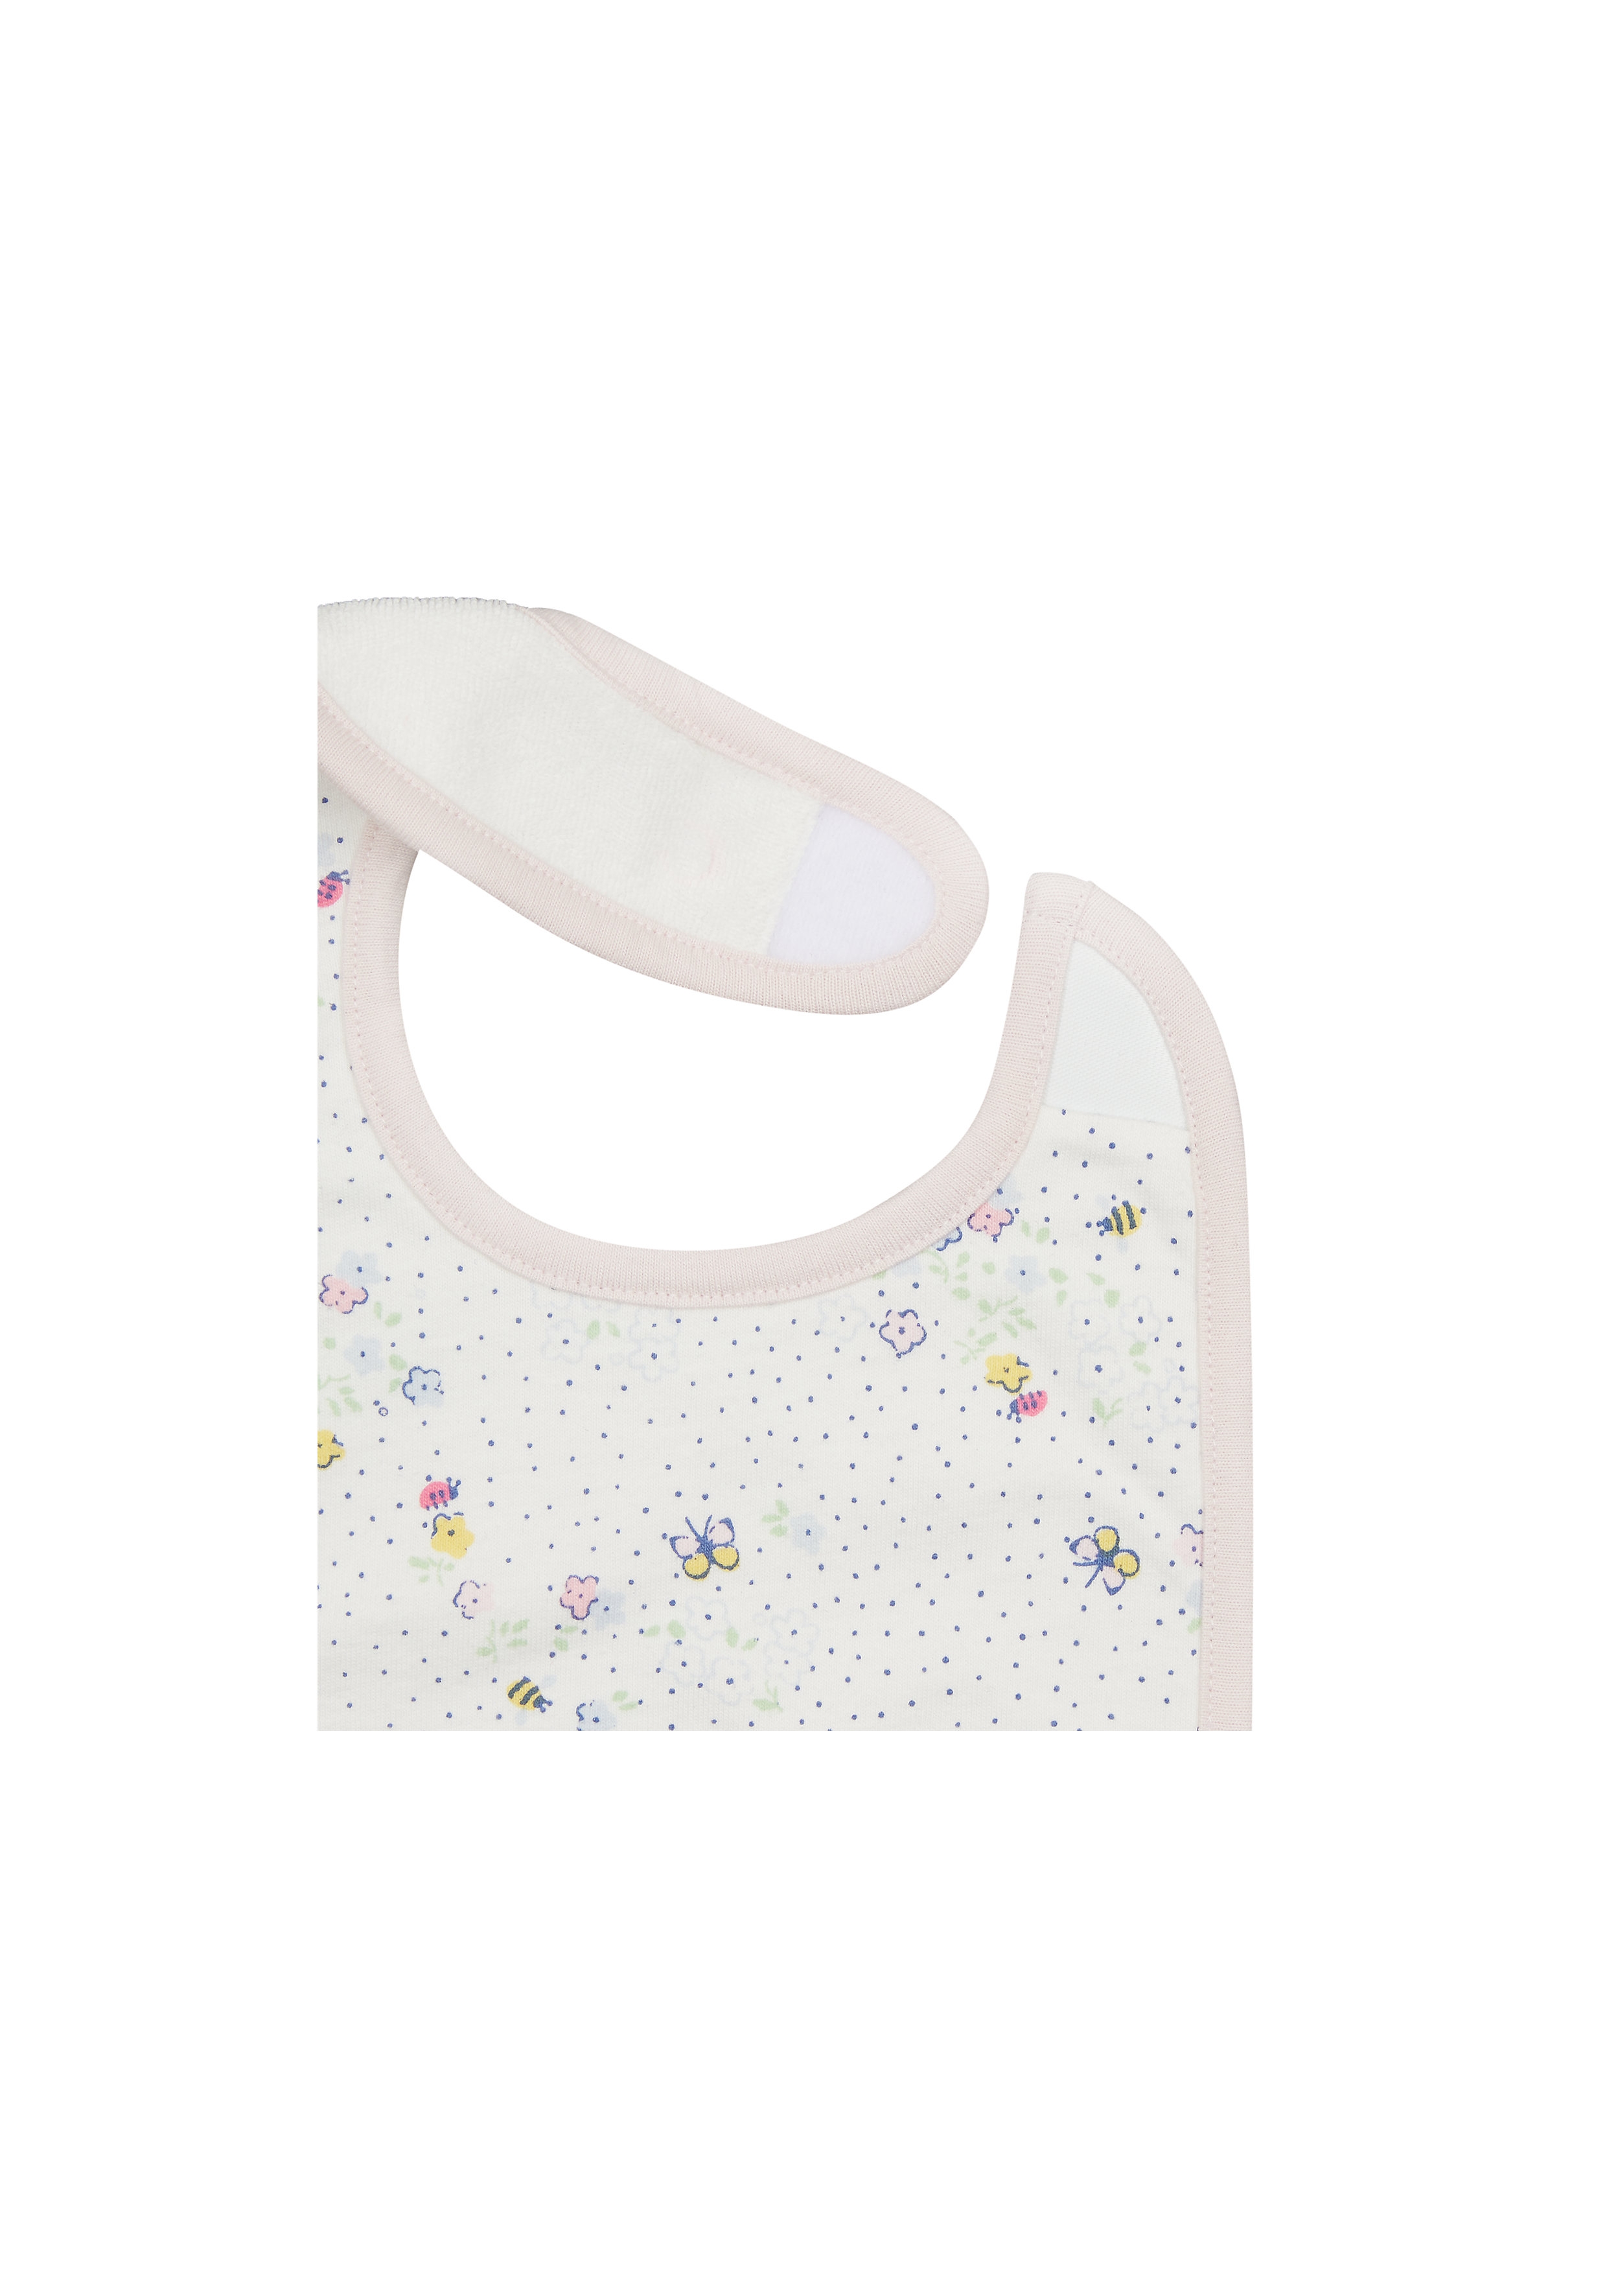 Mothercare | MOTHERCARE New born SPRING FLOWER 3PK BIBS PINK 1